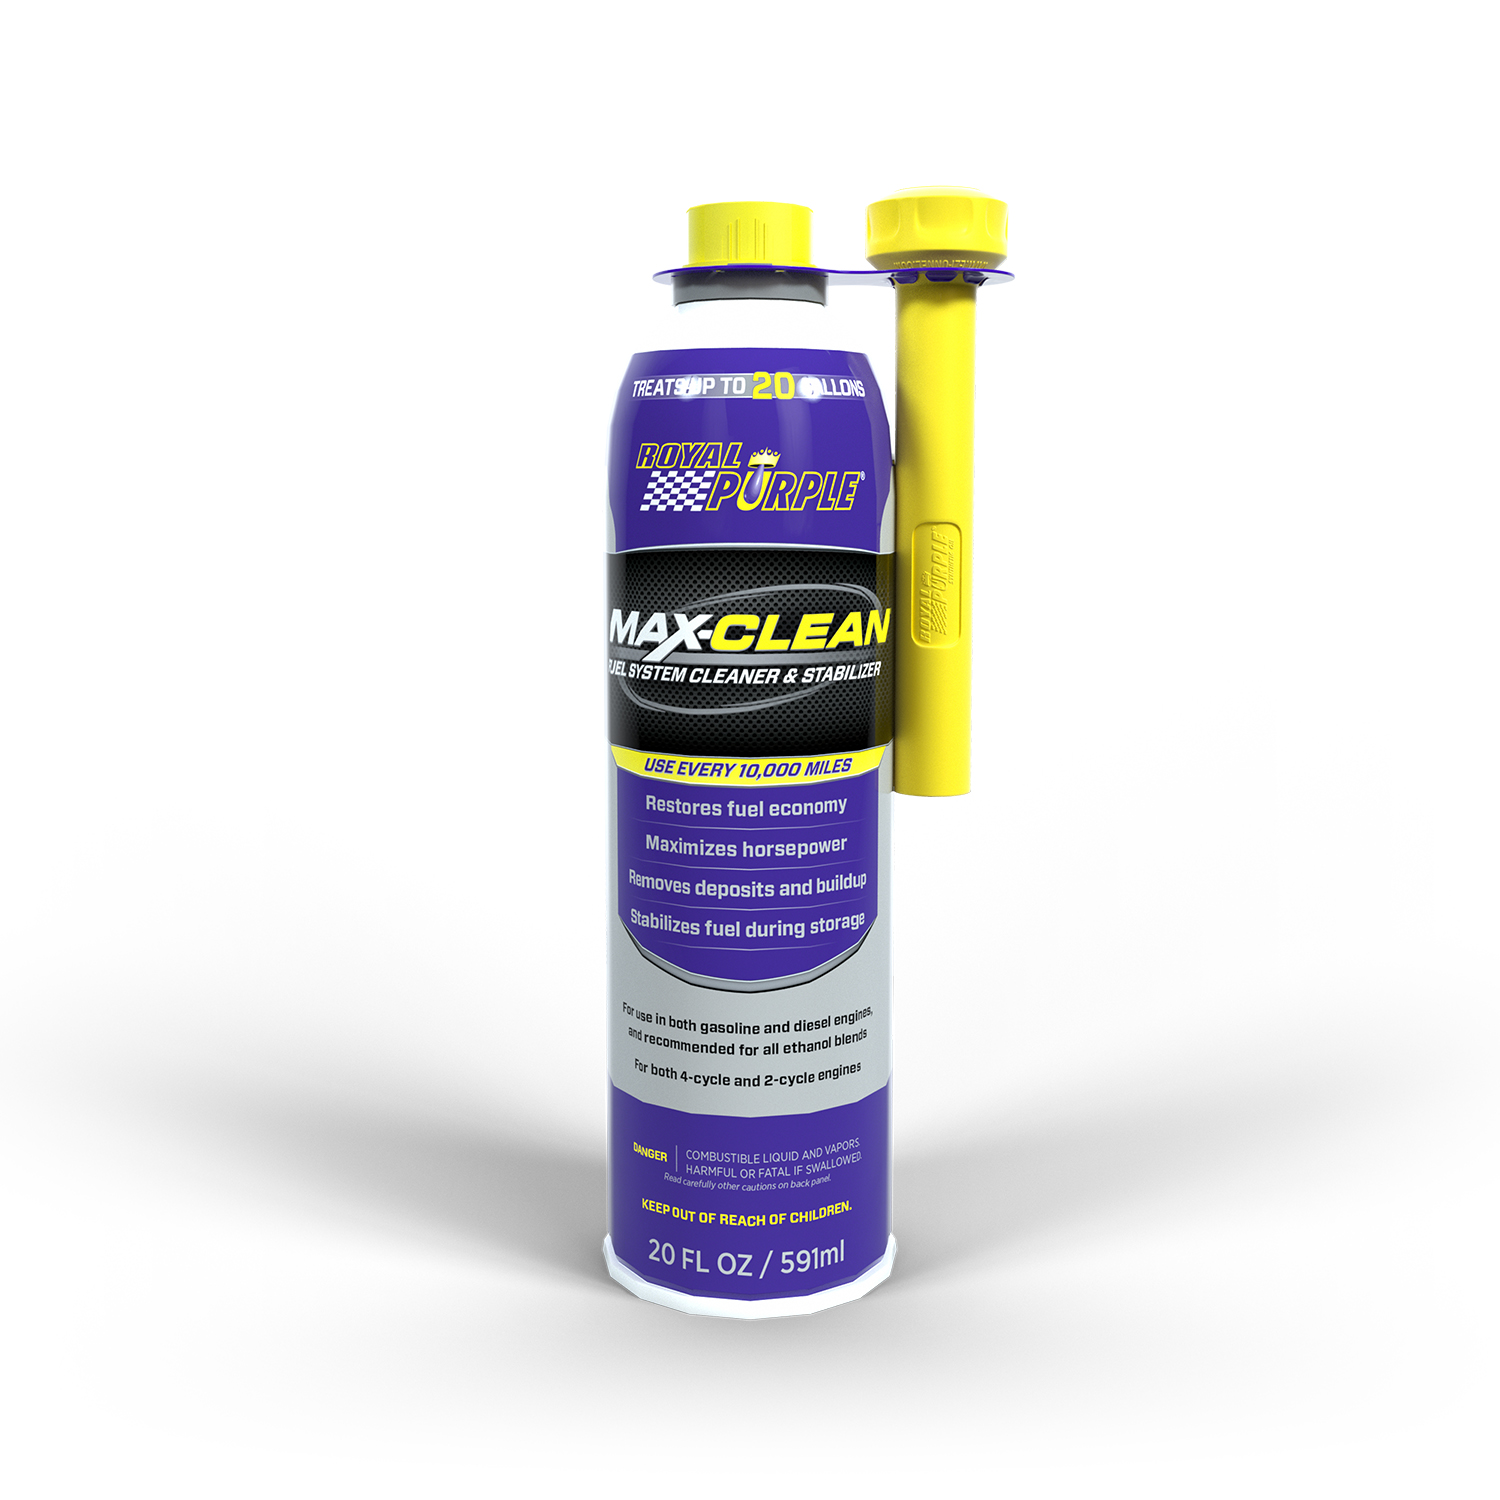 Cataclean - If you've used another fuel additive in the past and